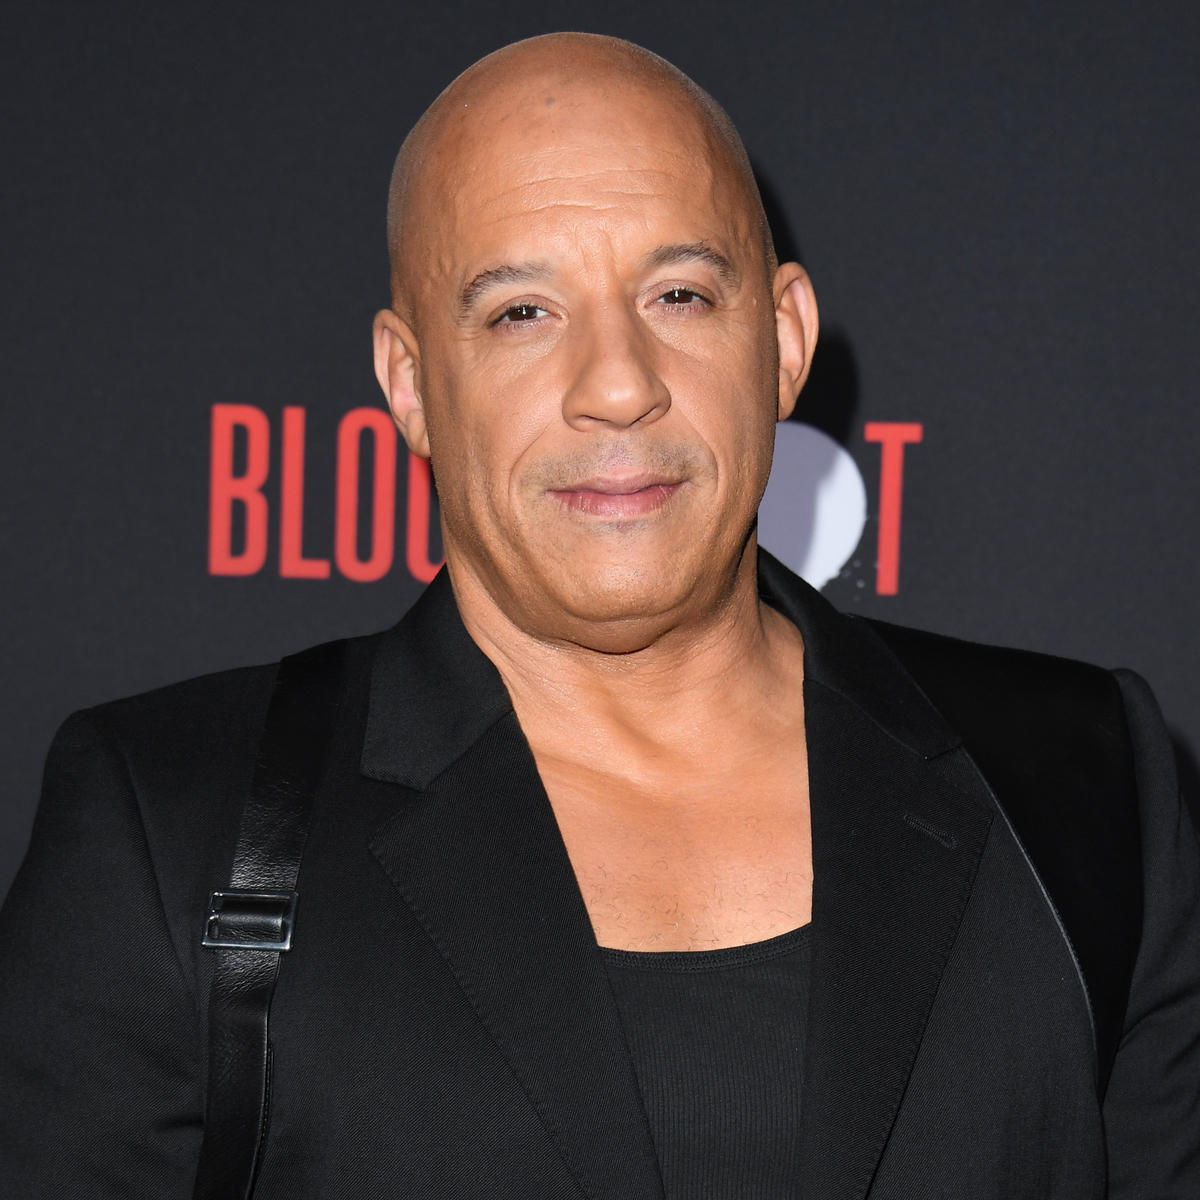 Vin Diesel accused of sexually assaulting assistant in Atlanta hotel room over a decade ago